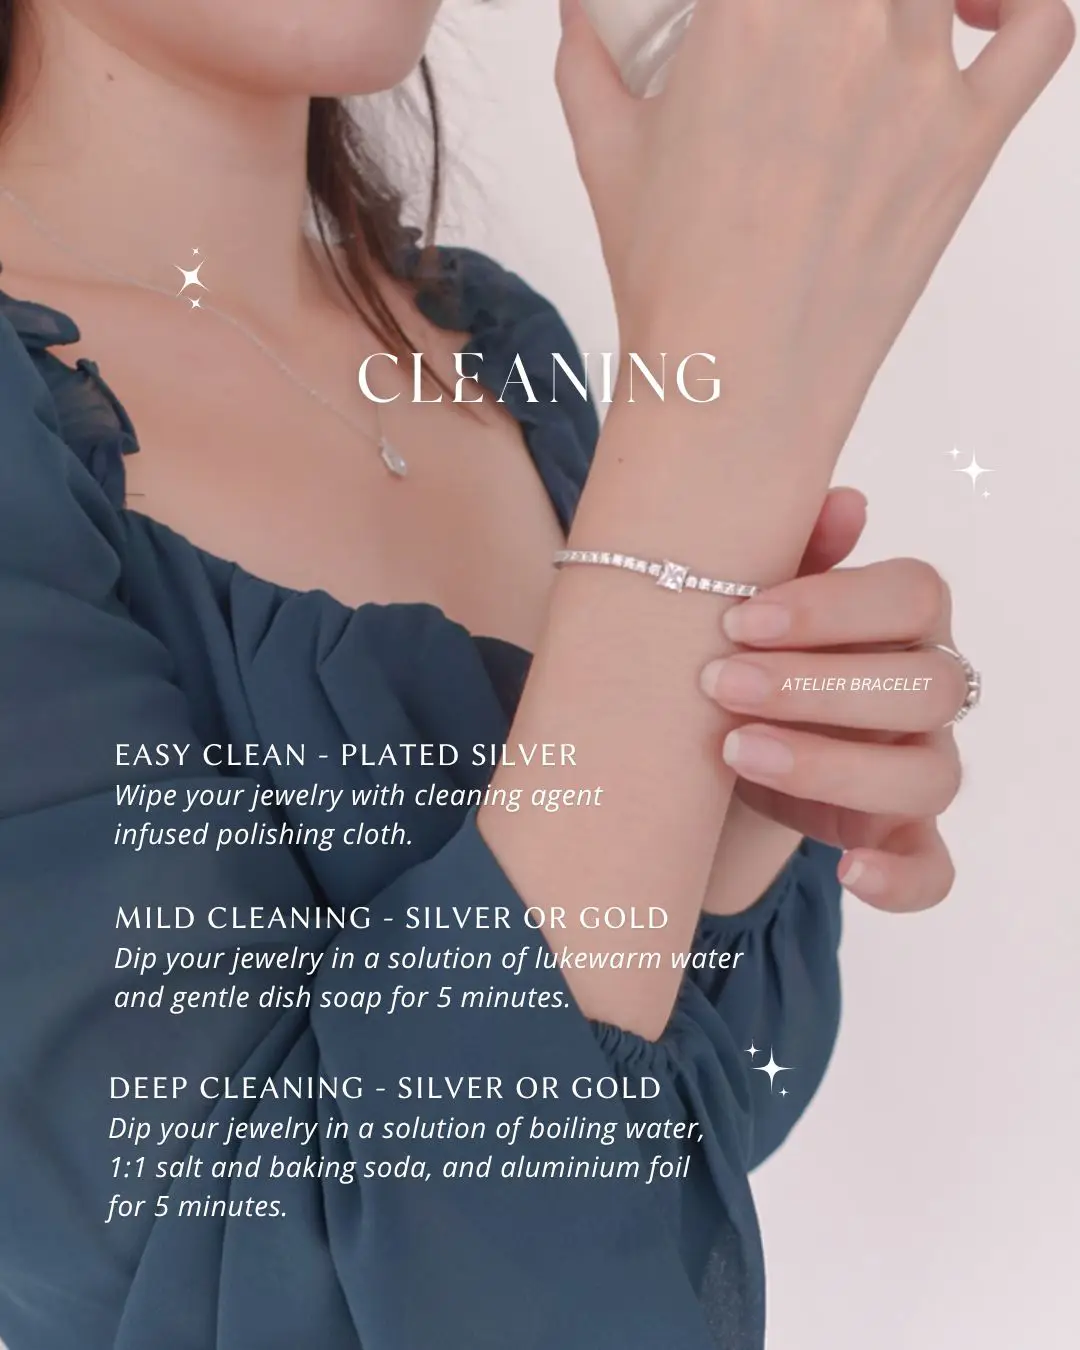 JEWELRY CARE: How To Clean Your Jewelry With A Polishing Cloth